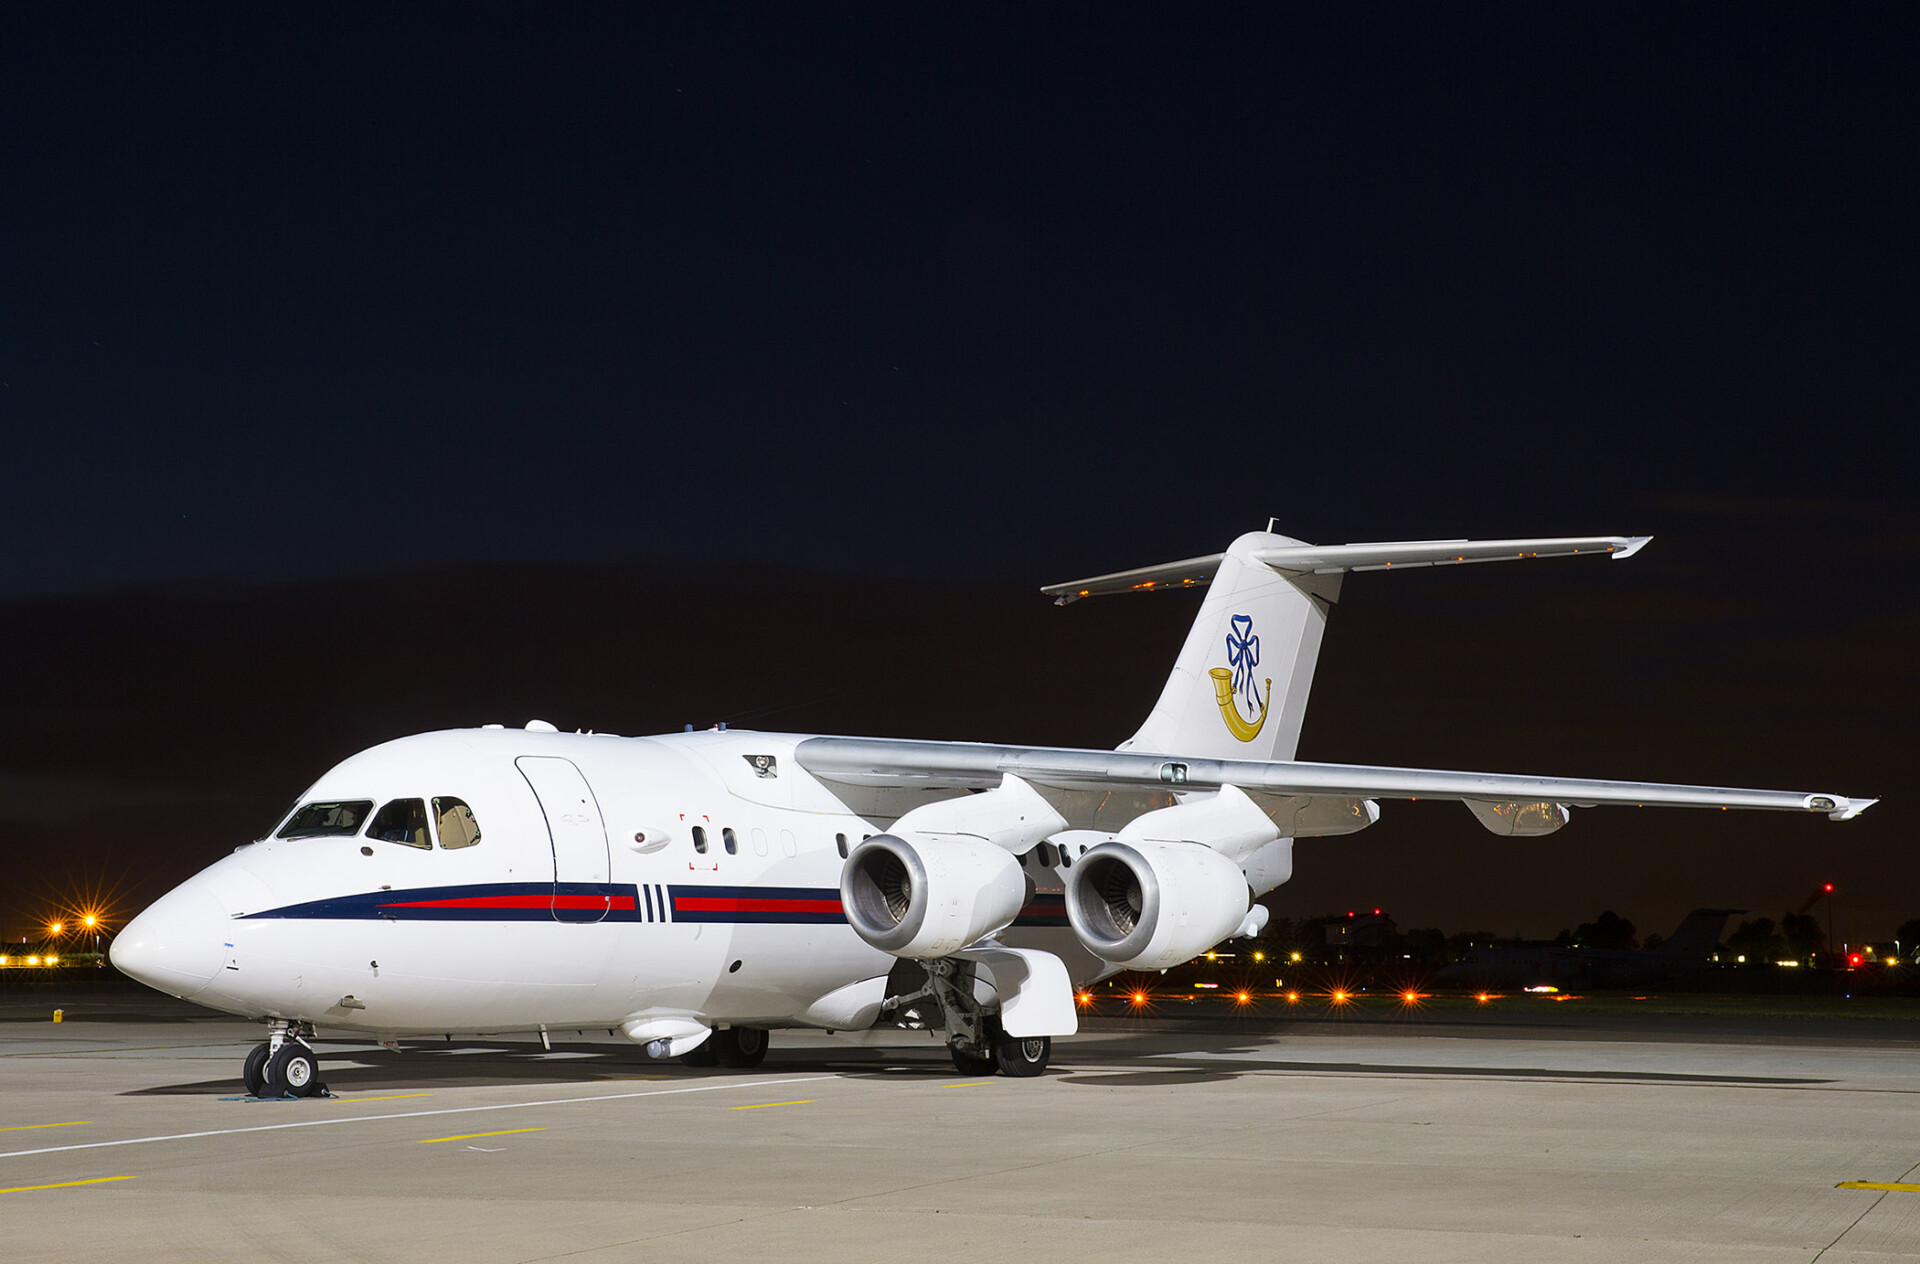 Two ex-RAF BAe 146 aircraft to be preserved at museums